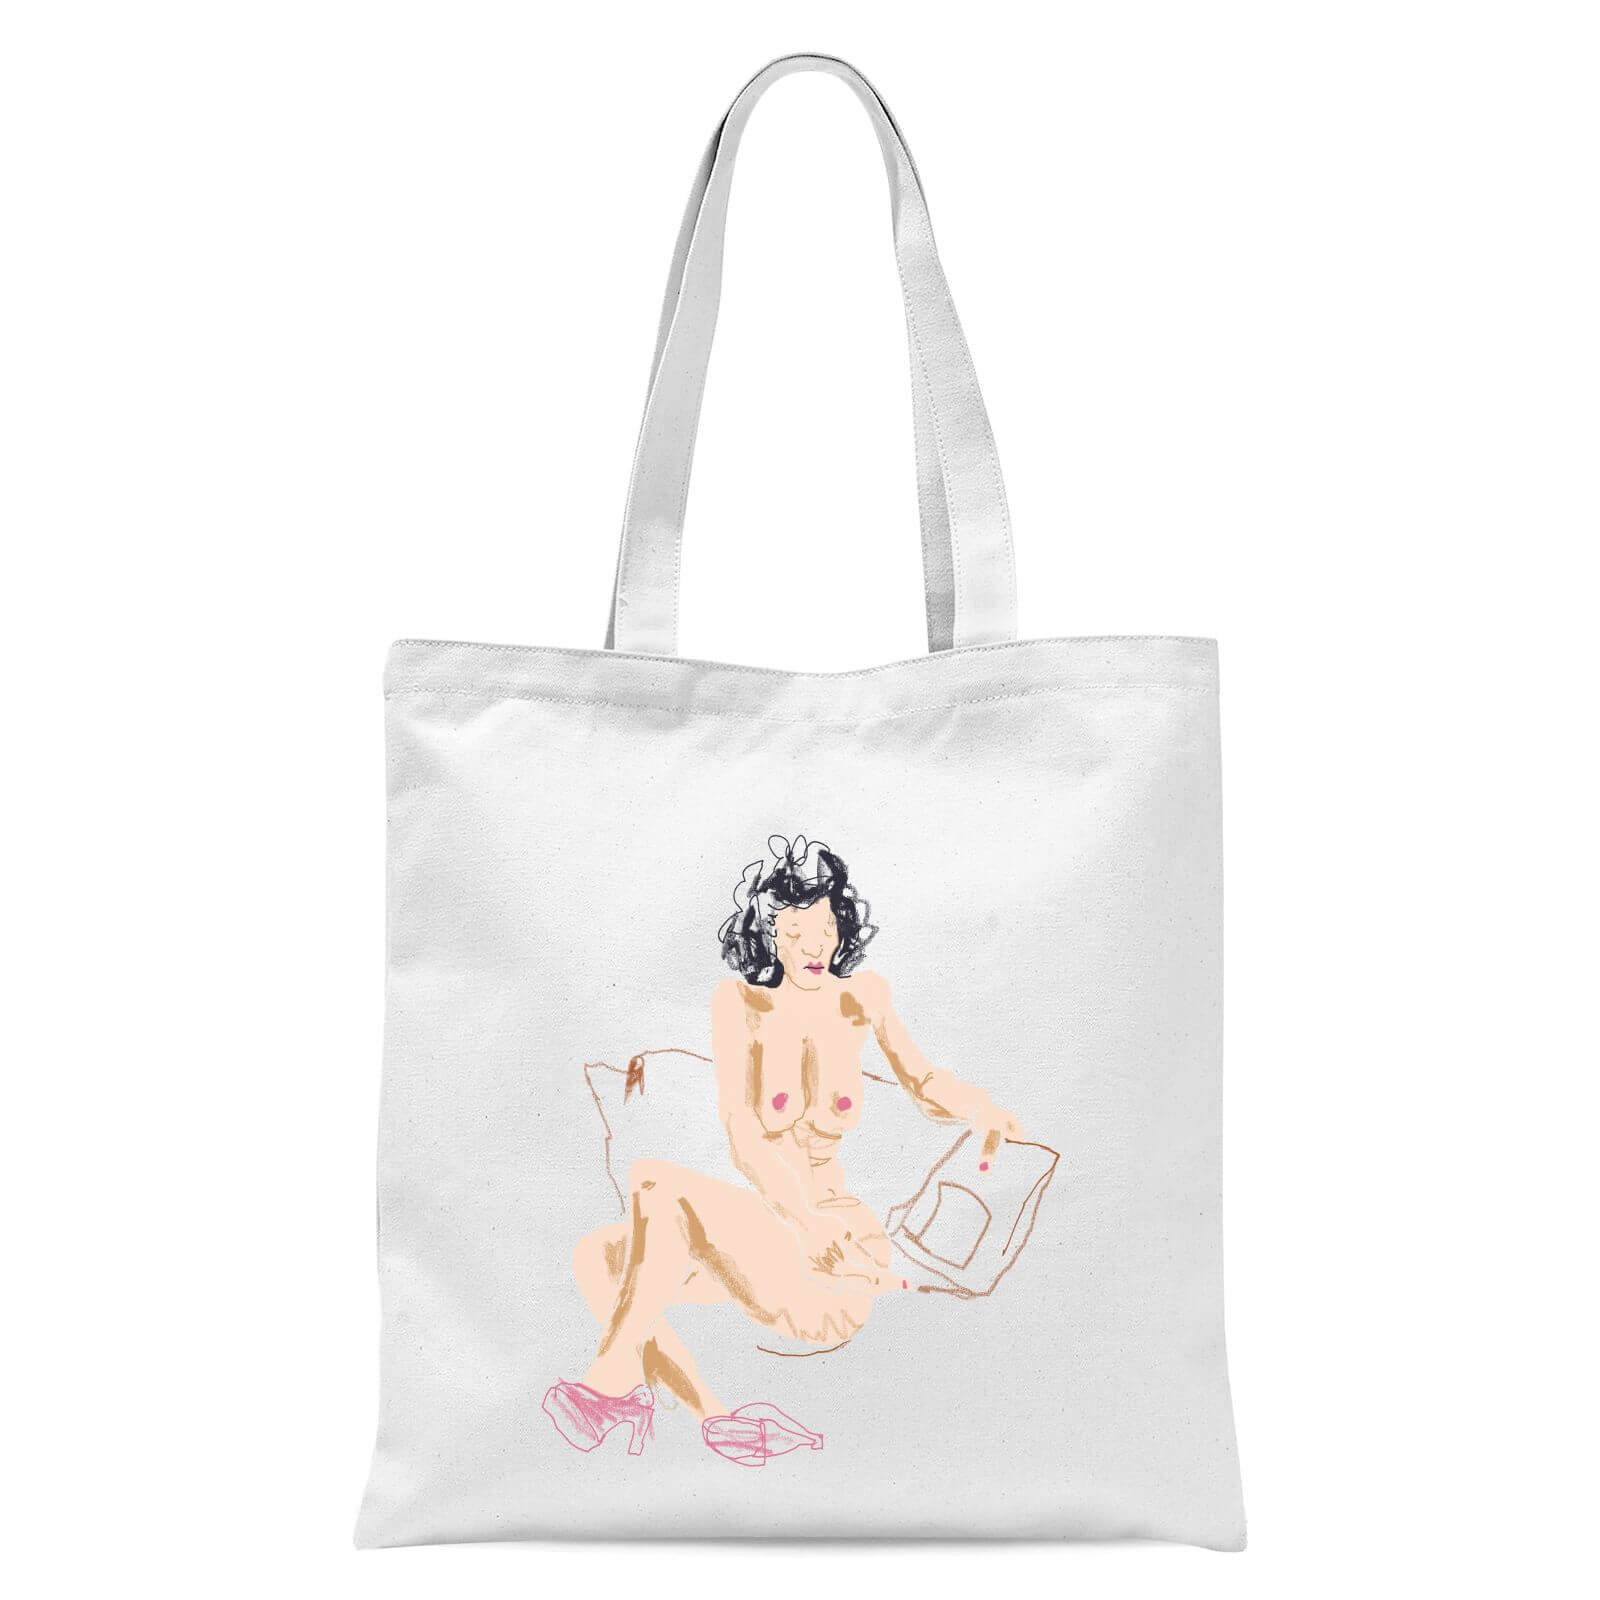 Girl With A Magazine Tote Bag - White